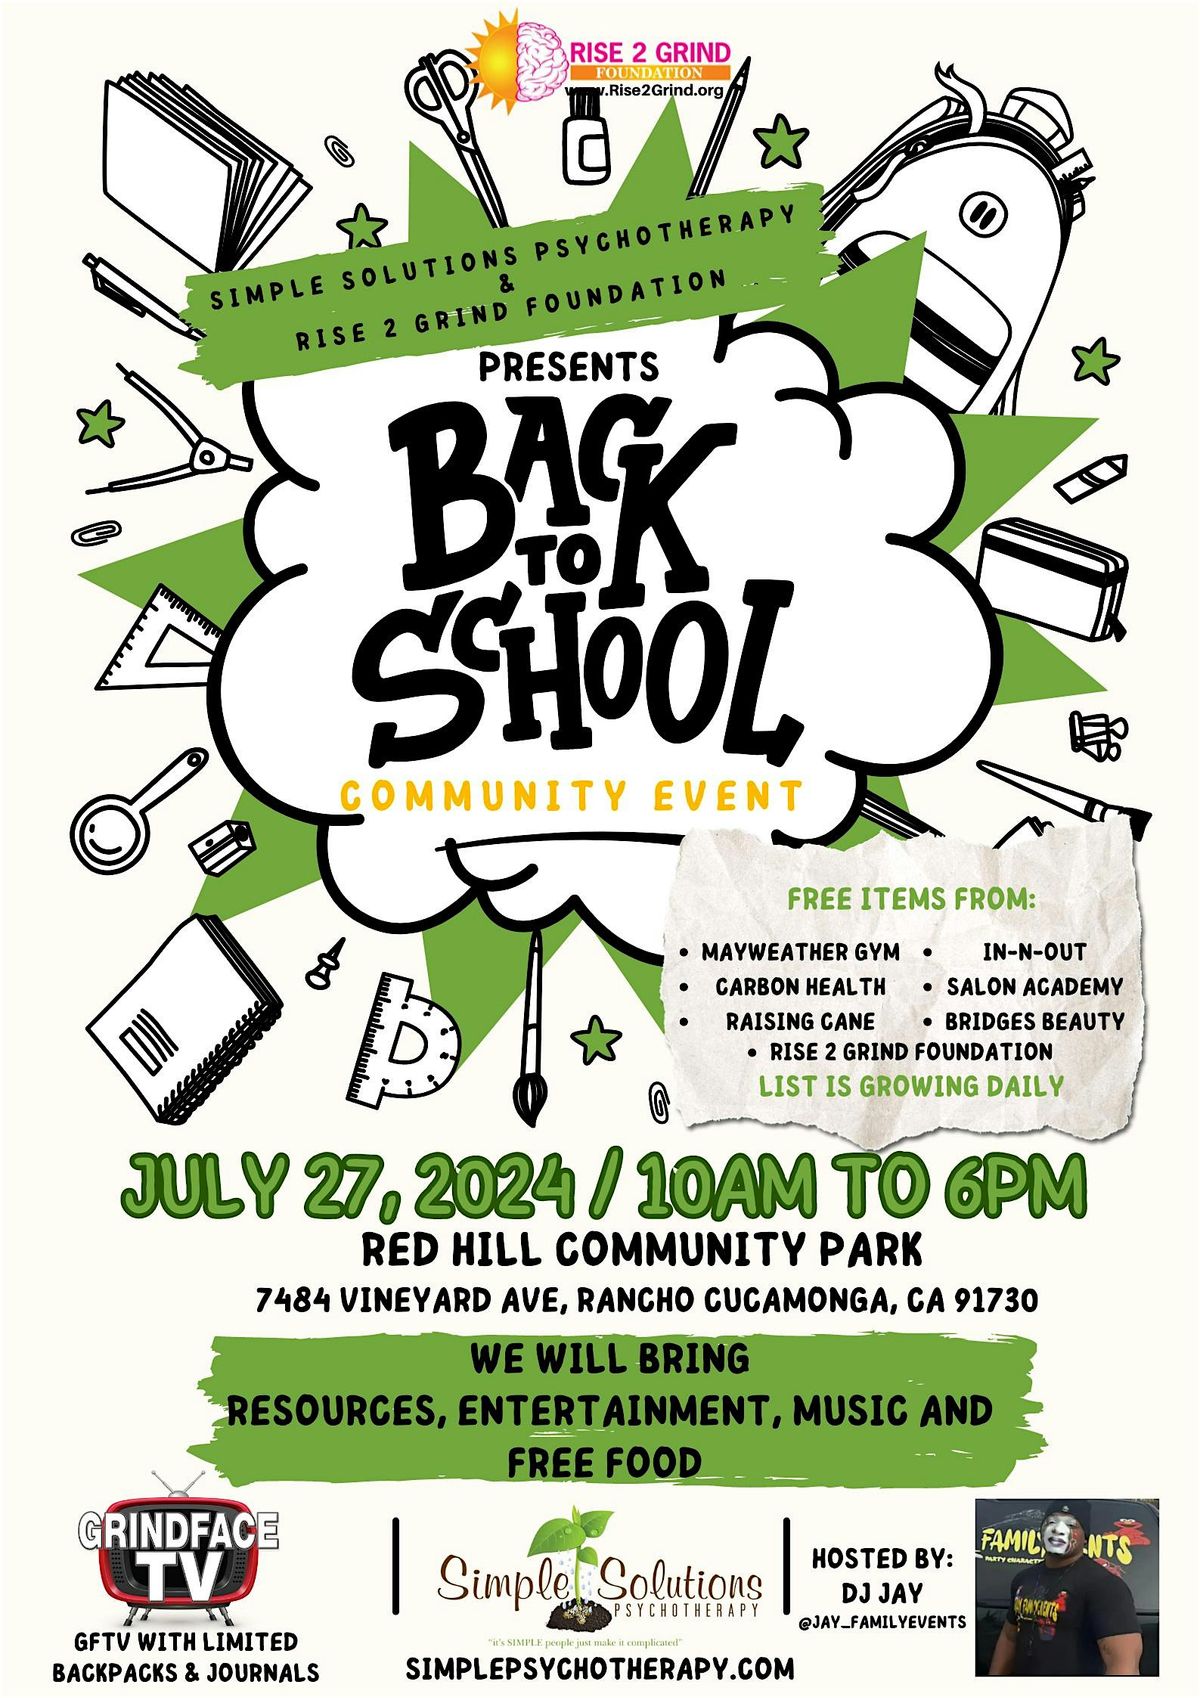 Simple Solutions Psychotherapy and Rise 2 Grind Foundation Presents: Back To School Community Event